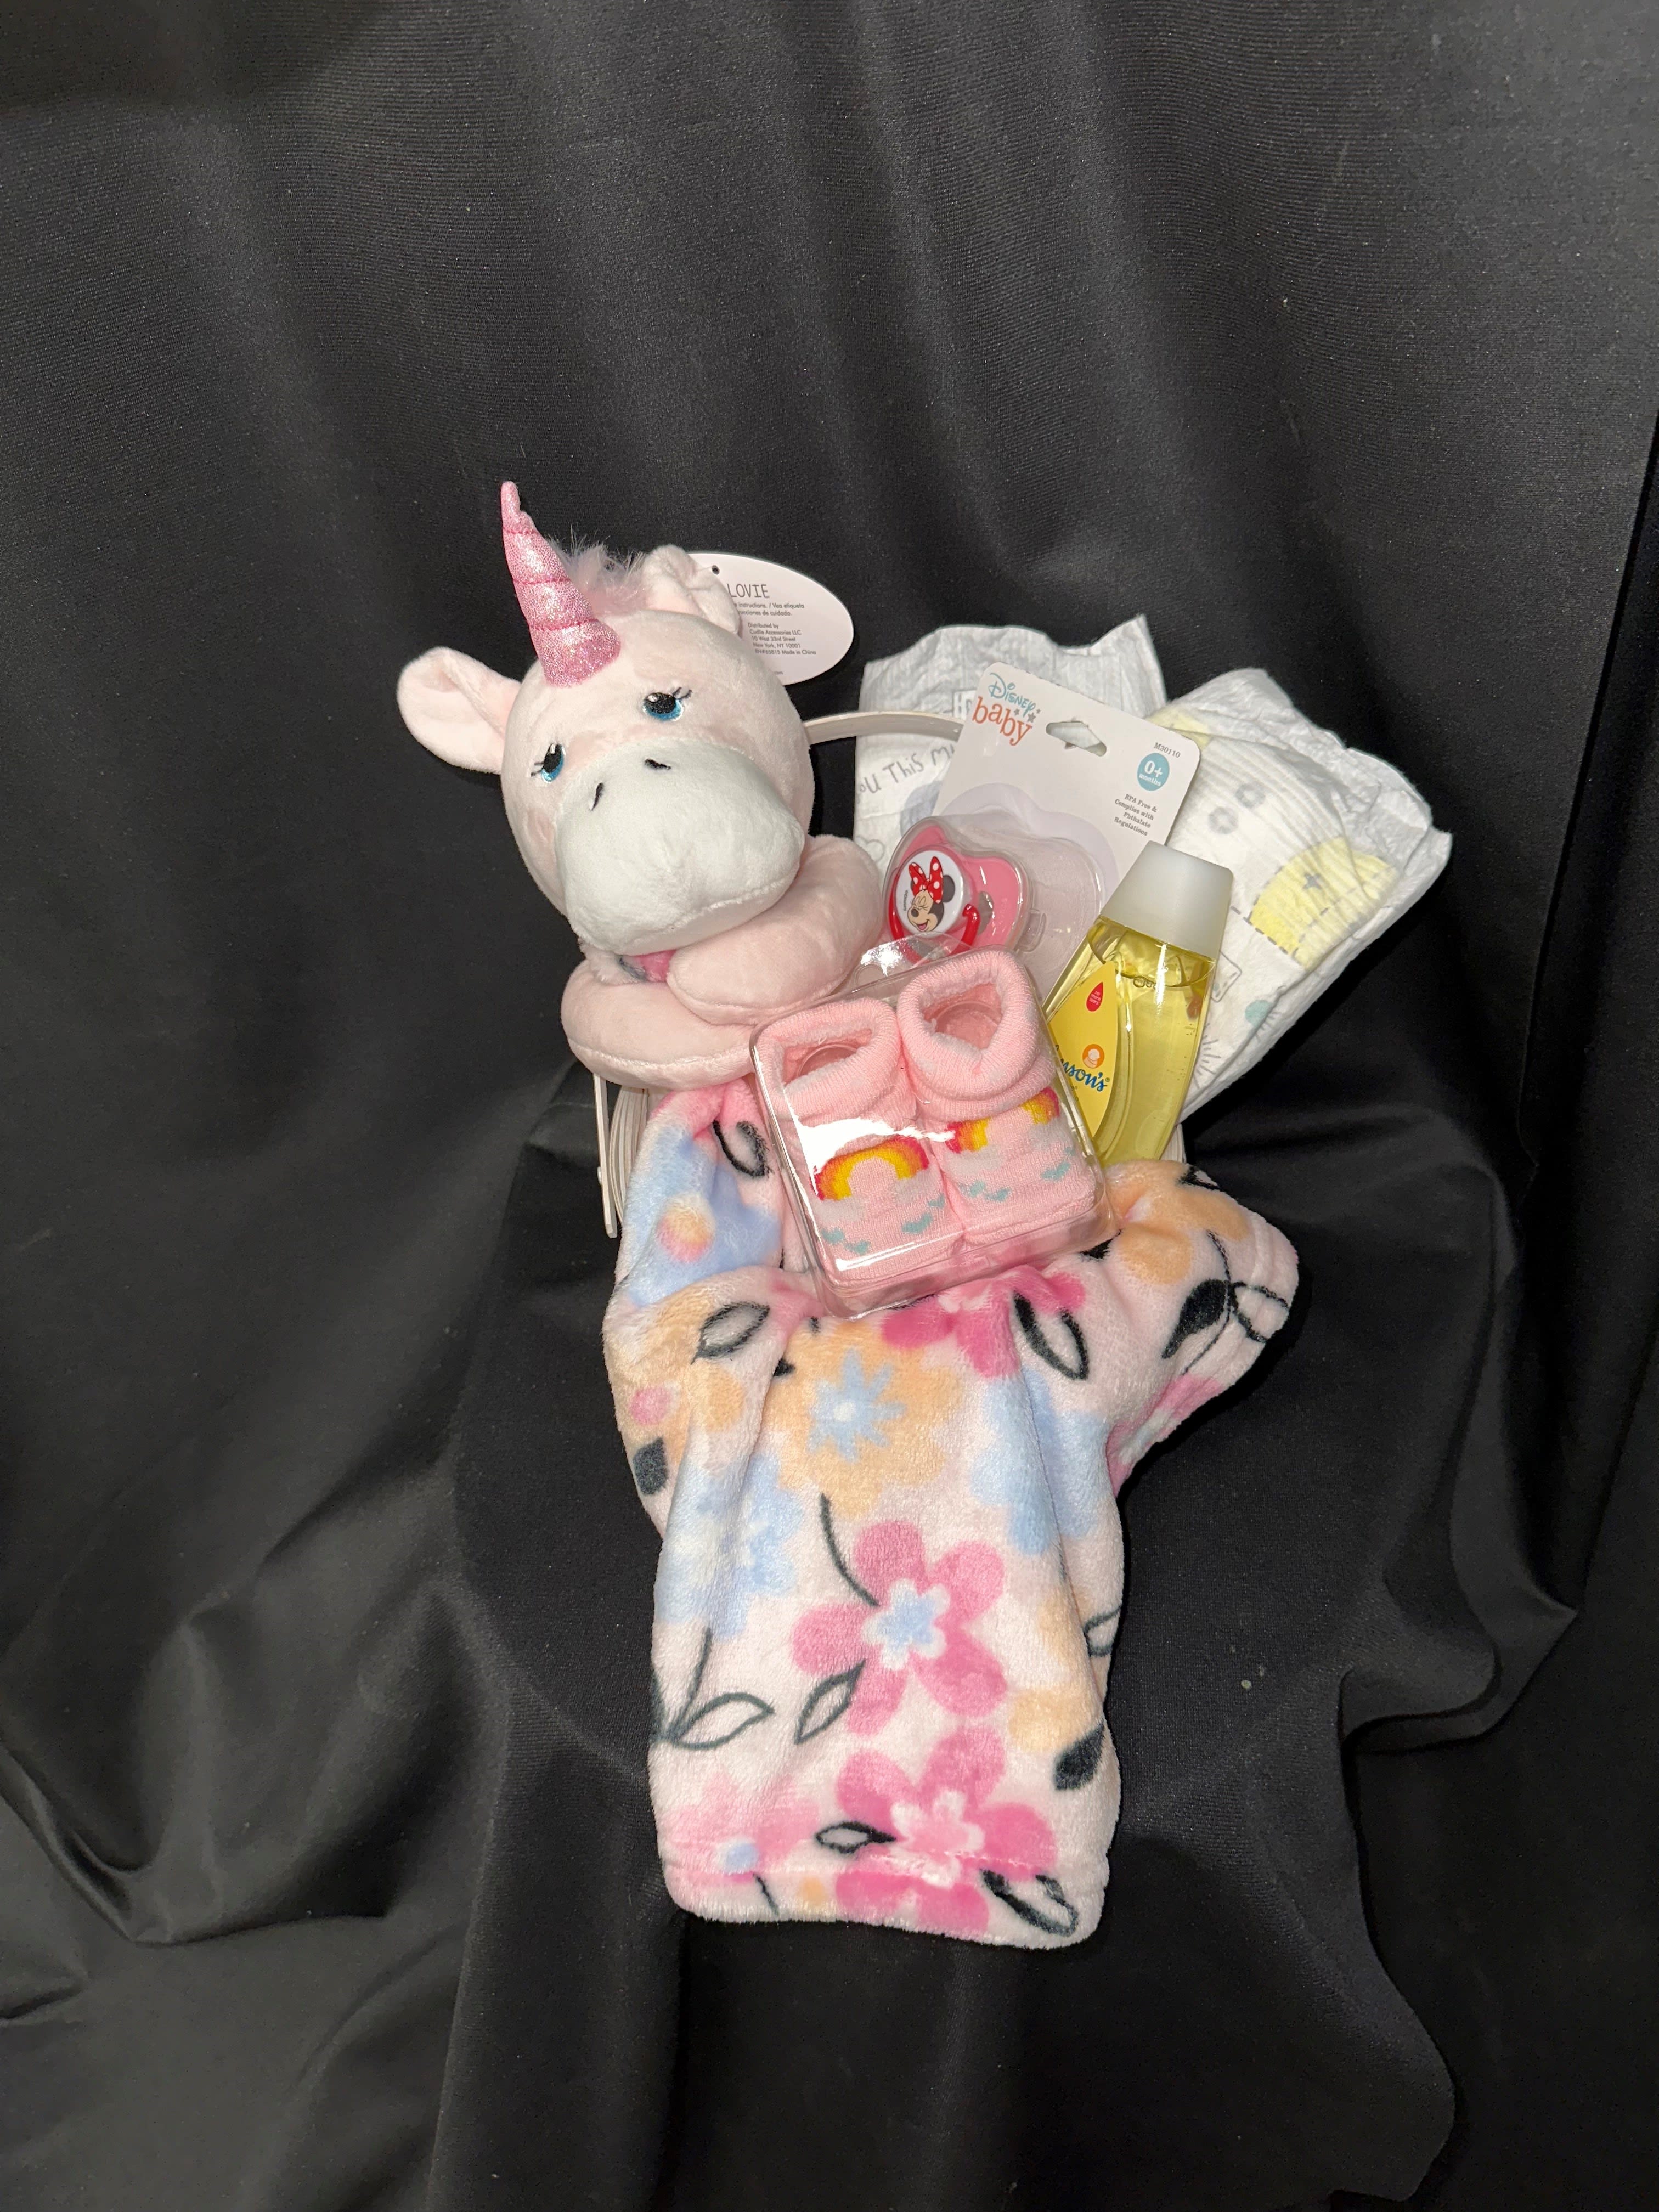 Precious Baby Girl Basket - Celebrate the joyous arrival of the precious baby girl with our charming baby essentials basket, available in two sizes to suit your needs.  Standard Size:  A sweet and cuddly stuffed unicorn with a cozy blanket Adorable pink baby socks to keep tiny feet warm Sweet-smelling Johnson &amp; Johnson baby shampoo for gentle cleansing A pink pacifier for soothing comfort Diapers for practical convenience Deluxe Size (additional items):  Fisher Price baby lotion for soft, nourished skin A soft burp cloth for mess-free feeding A bottle brush for easy cleaning Rubber duckies for bath time fun A pink pacifier for soothing comfort Diapers for practical convenience These essential items are sure to welcome the newest little princess with warmth and care, making her feel right at home.